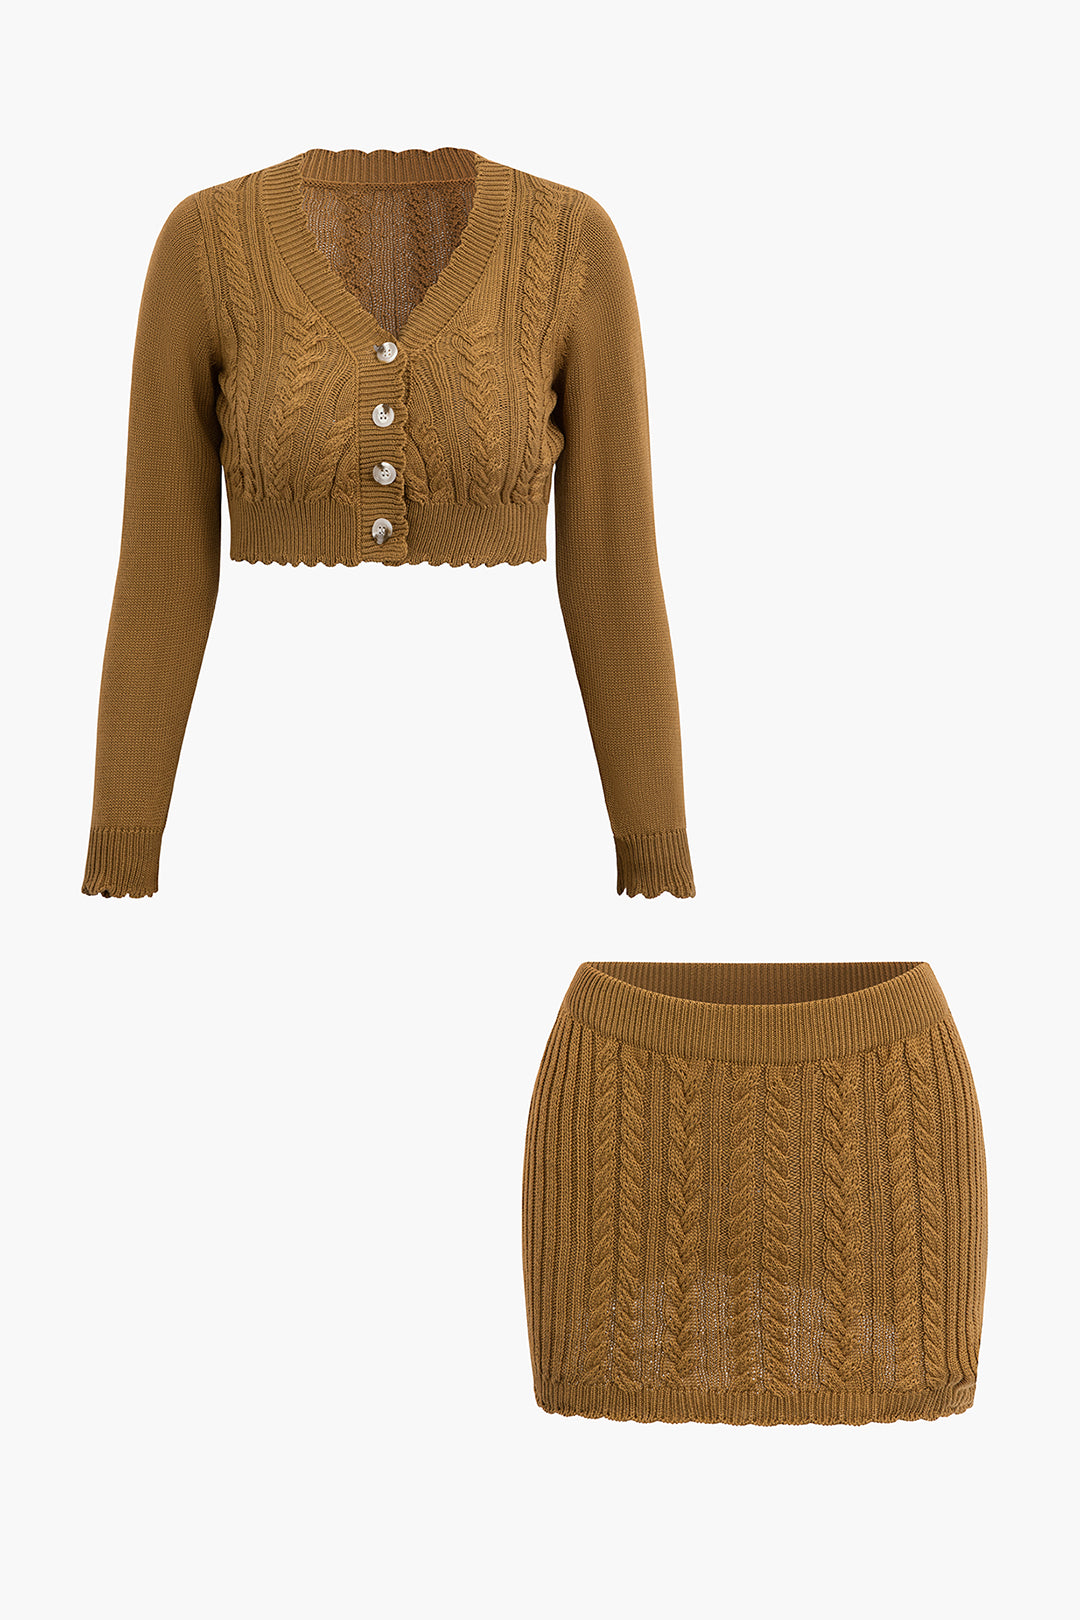 V-neck Button Up Cable Knit Crop Cardigan And Mini Skirt Set